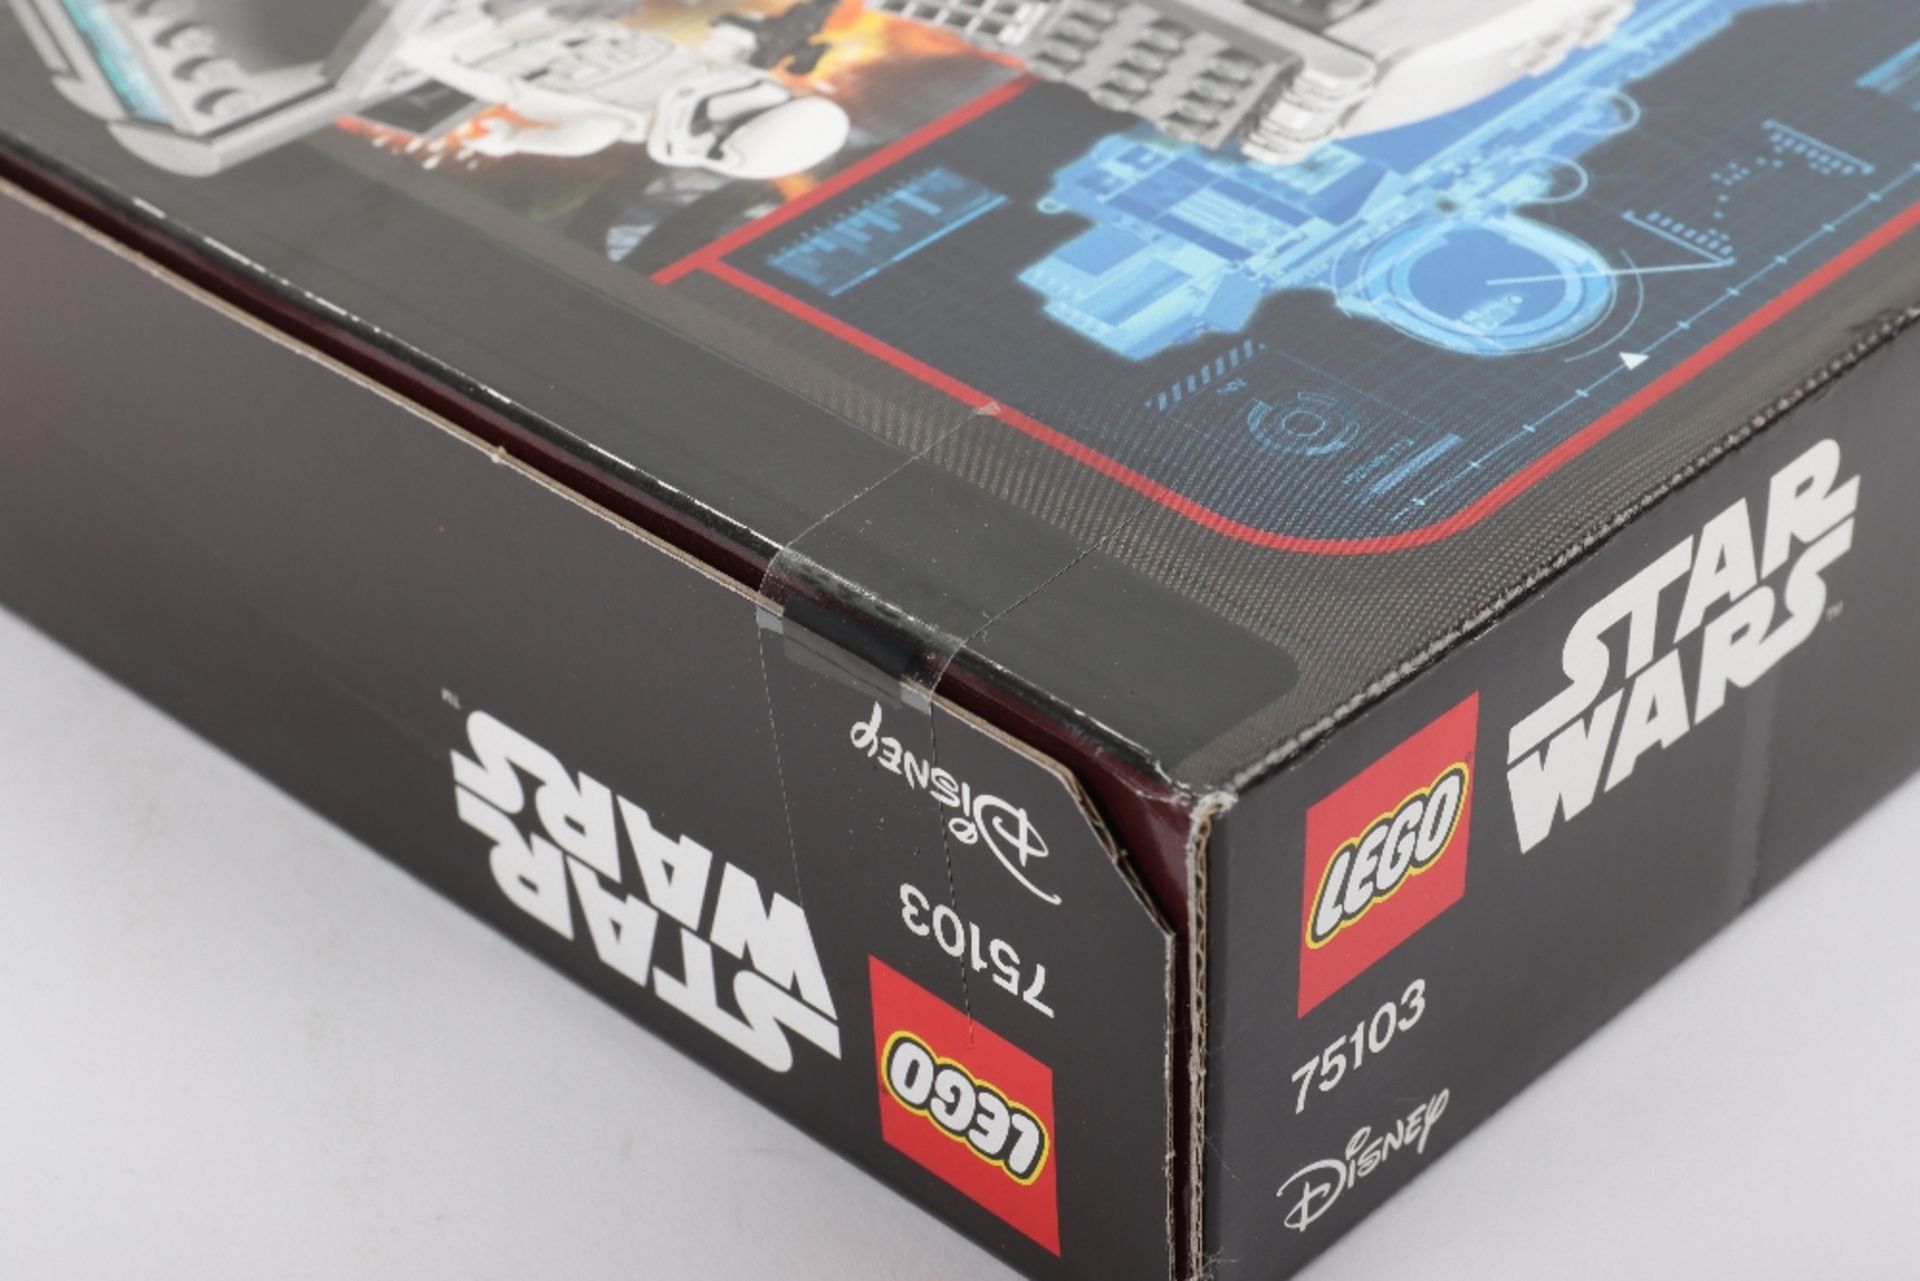 Lego Star Wars 75103 and 5002948 sealed boxed sets - Image 10 of 11